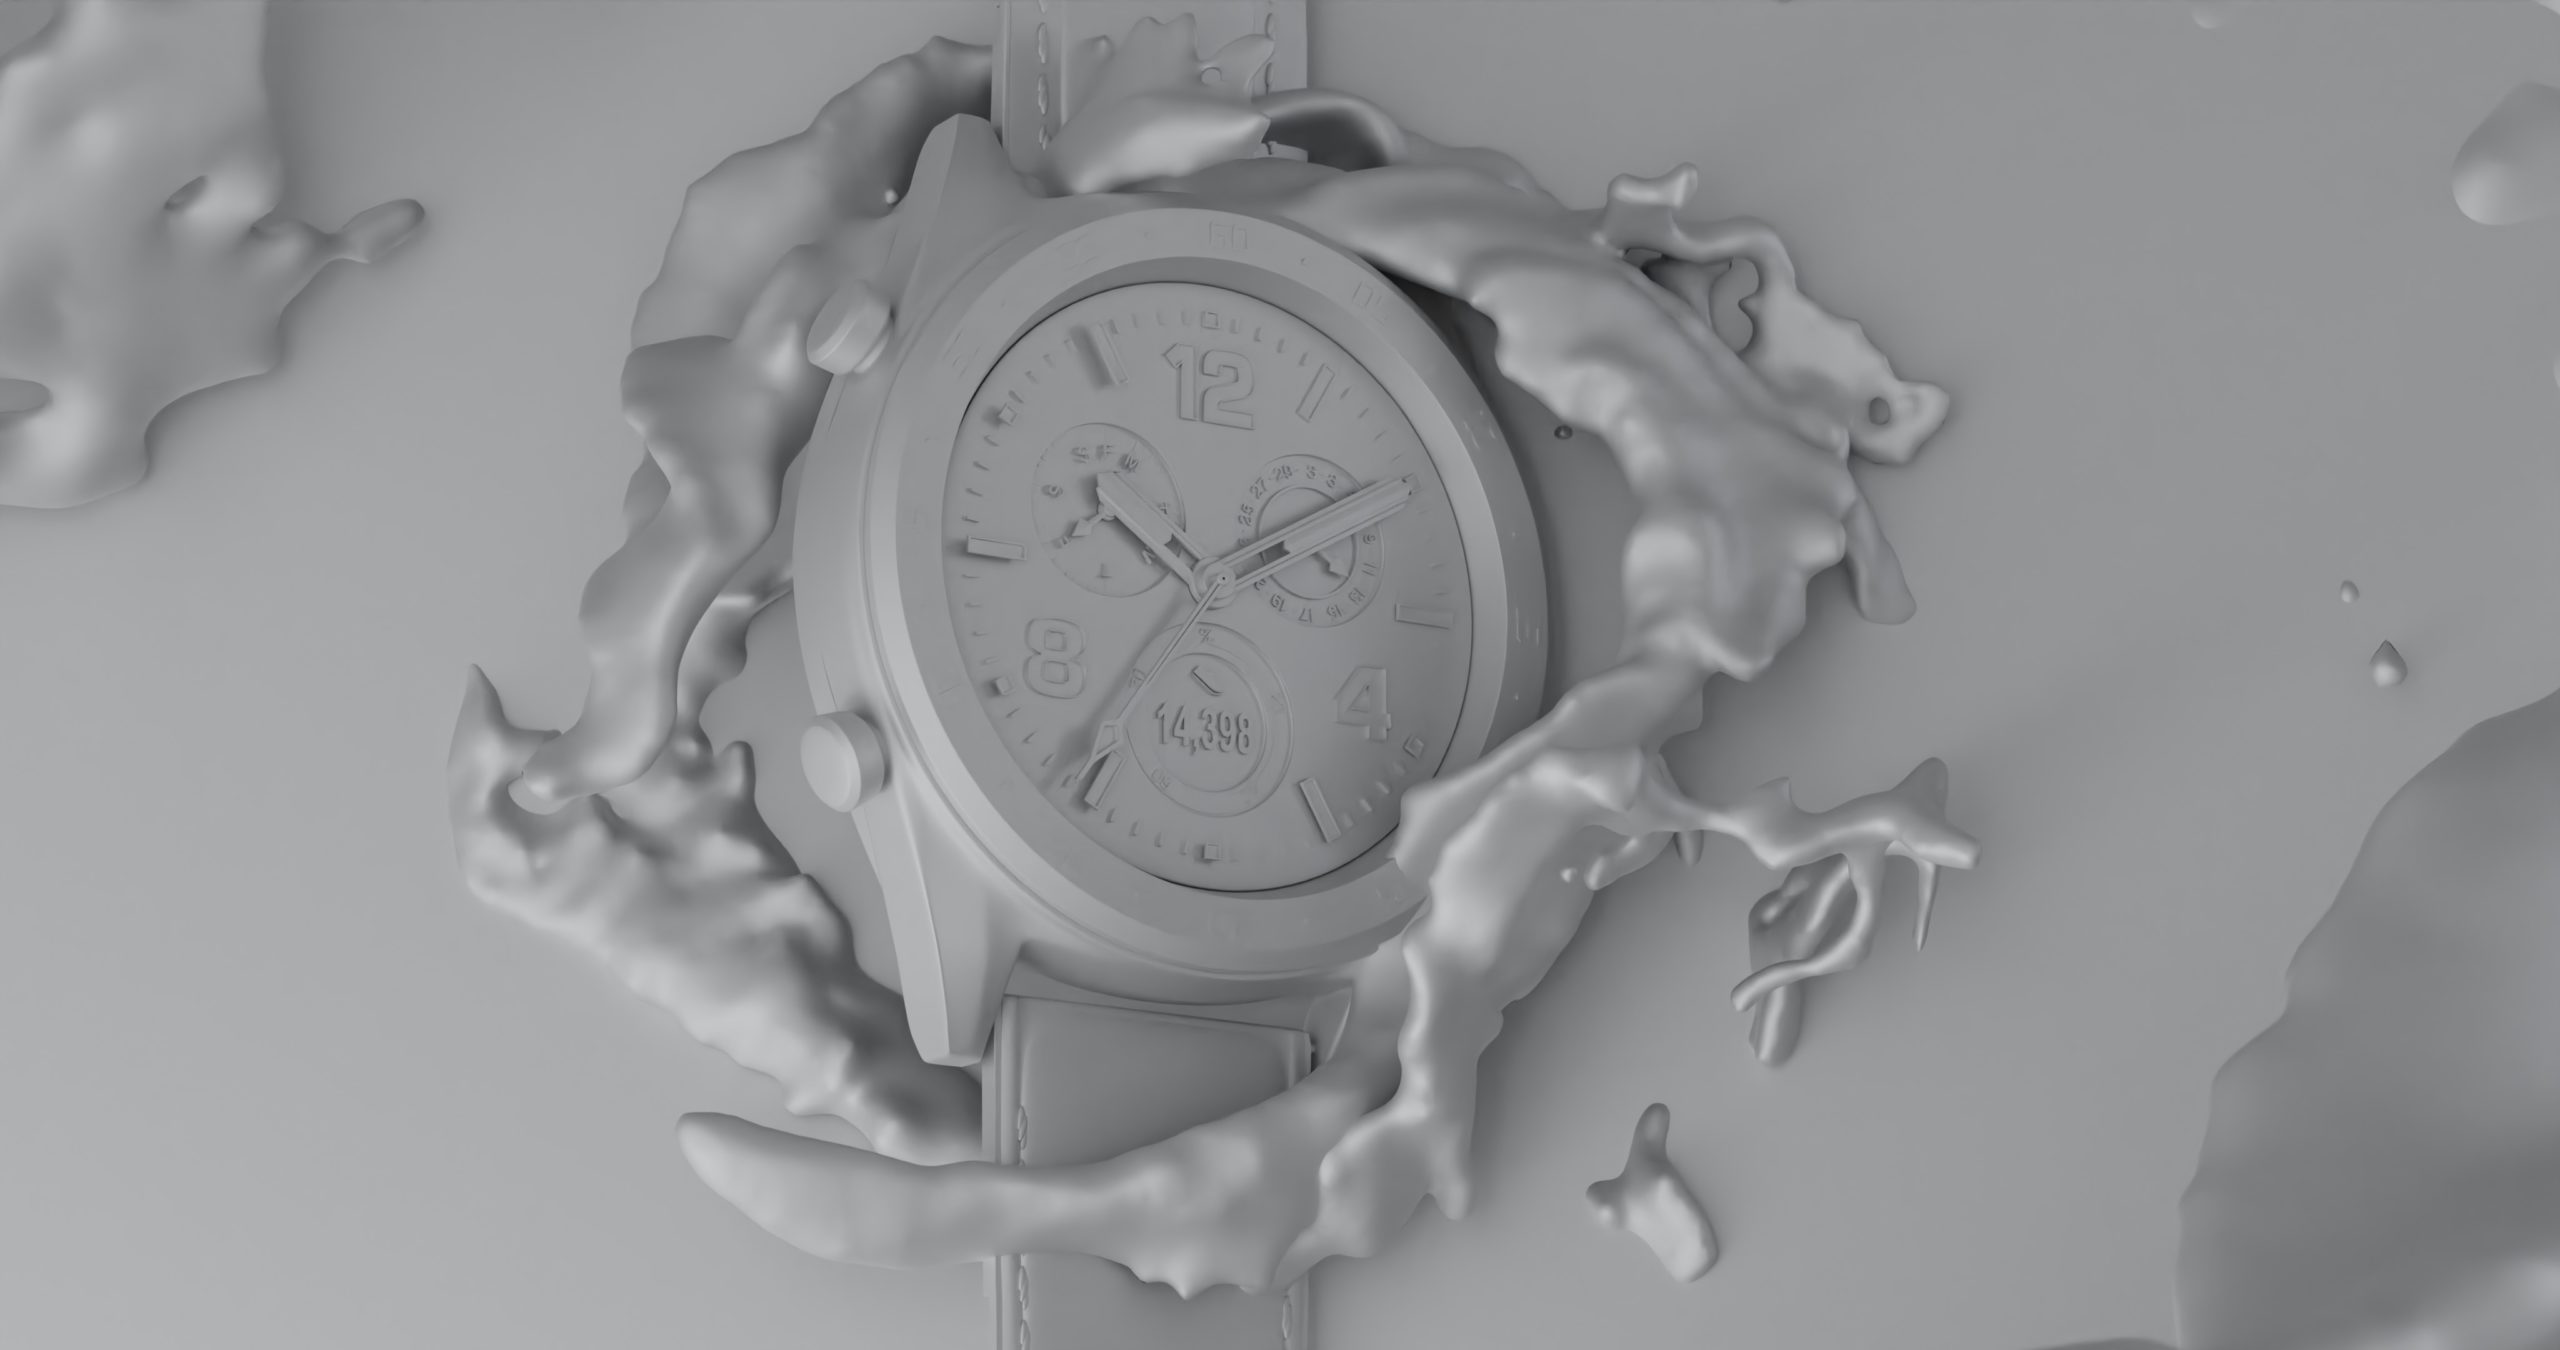 CGI photography with Wenbo Zhao Photography Product photographer Sydney Wenbo Zhao CGI Watch Photography red background with a sport watch under the ocean with splash Clay render